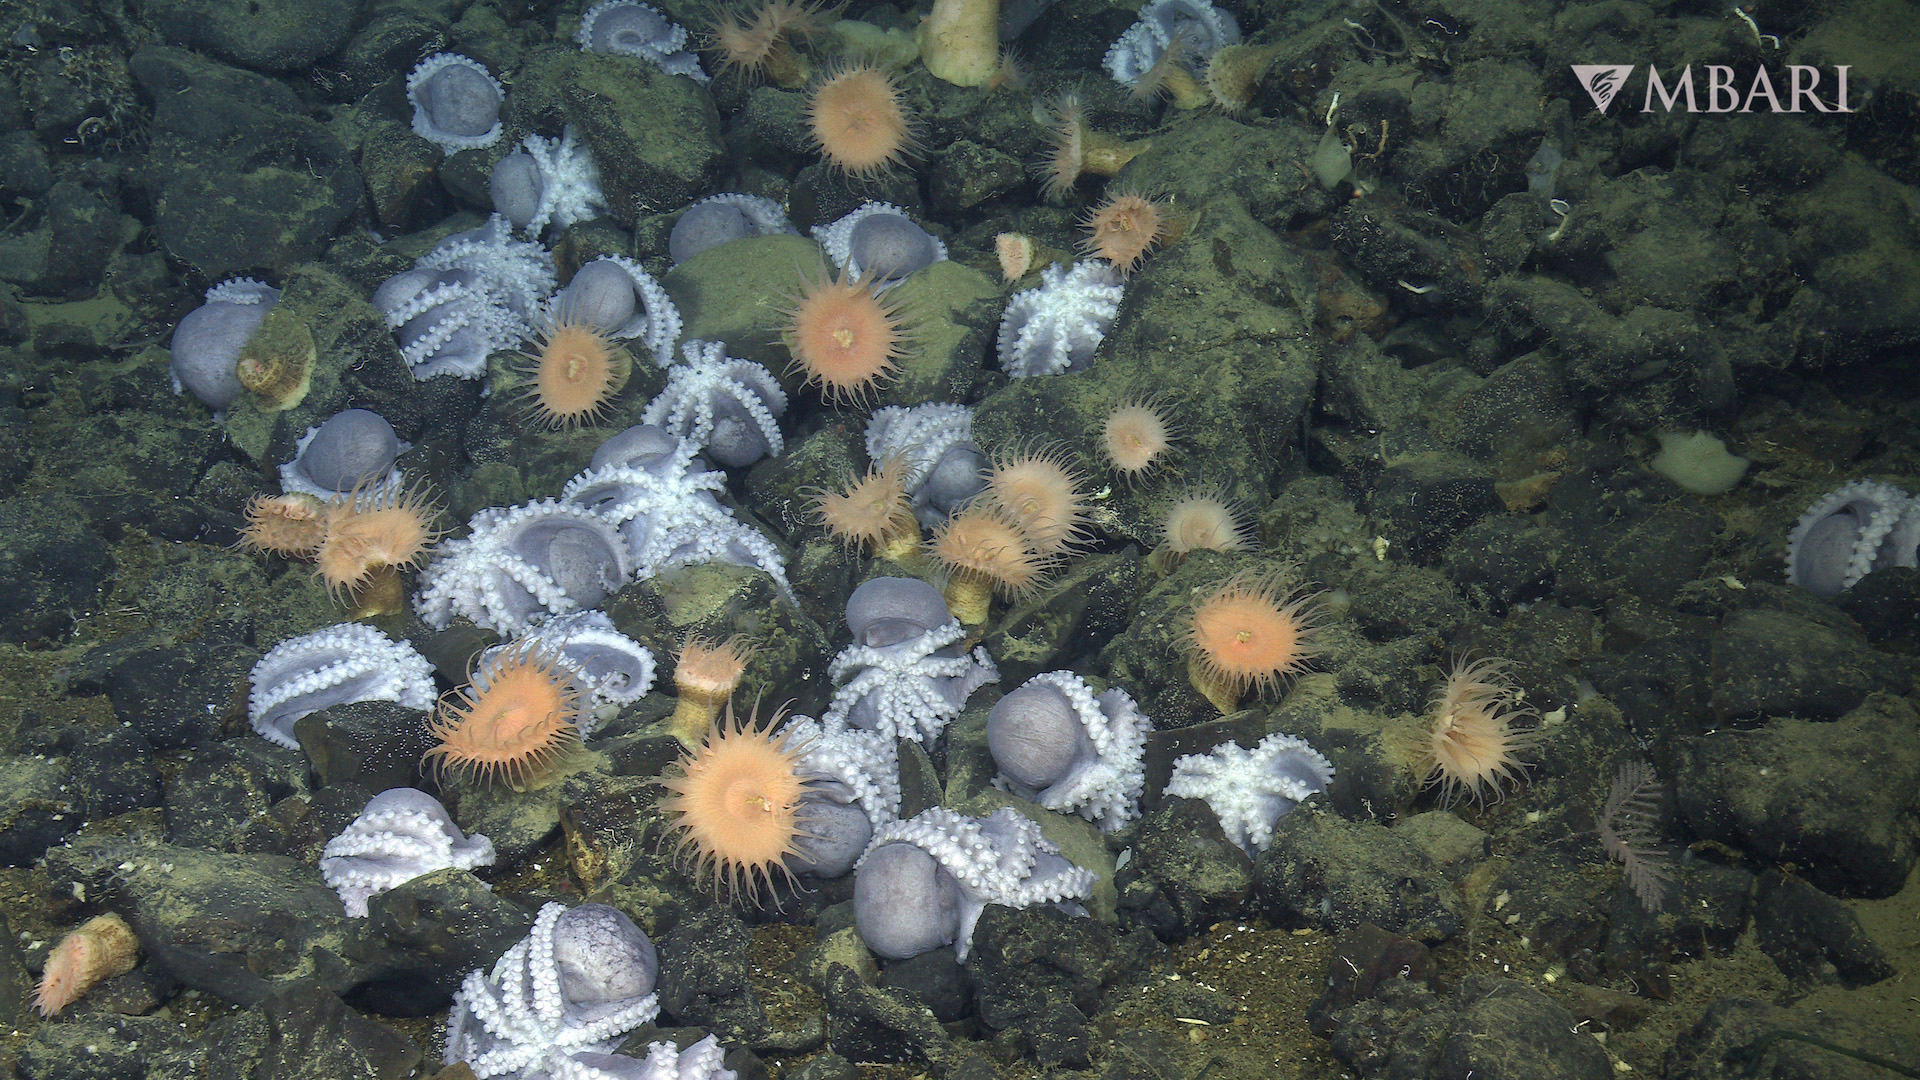 An aggregation of female pearl octopus (Muusoctopus robustus) nesting at the Octopus Garden, located near Davidson Seamount off the central California coast.